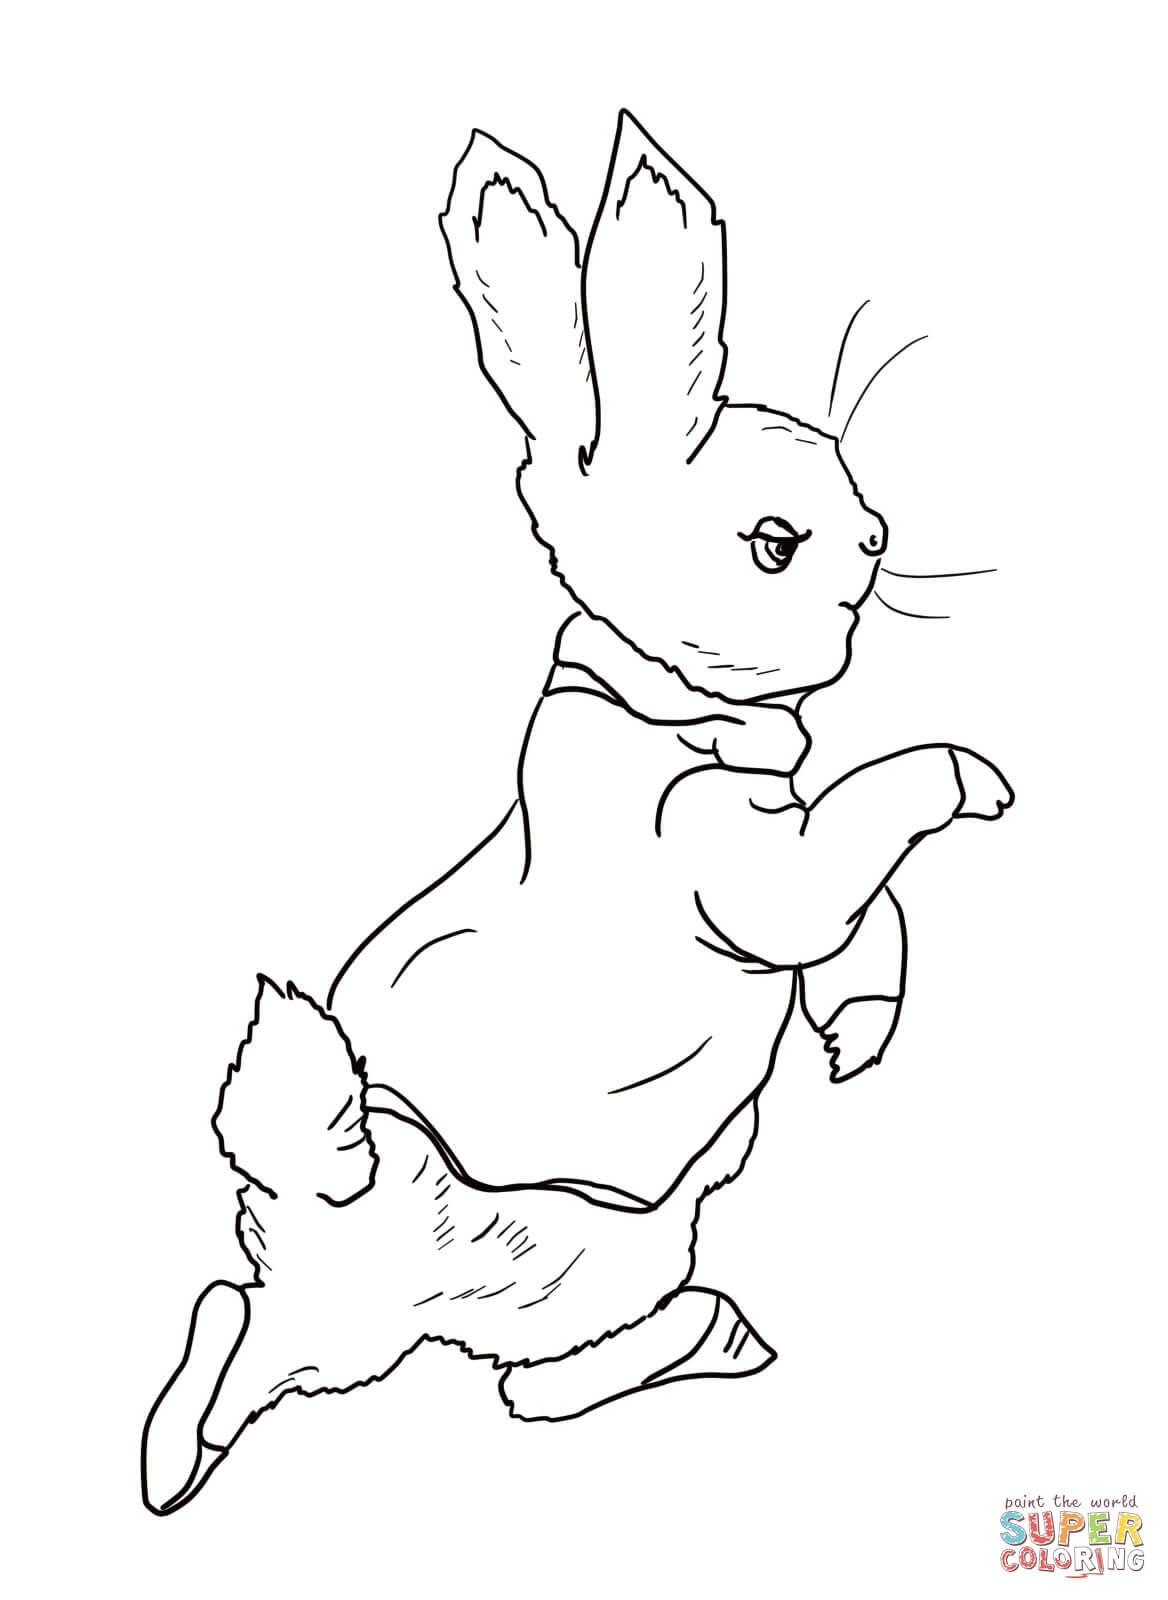 Free Printable Peter Rabbit Coloring Pages Peter Rabbit Coloring Pages Free Coloring Pages